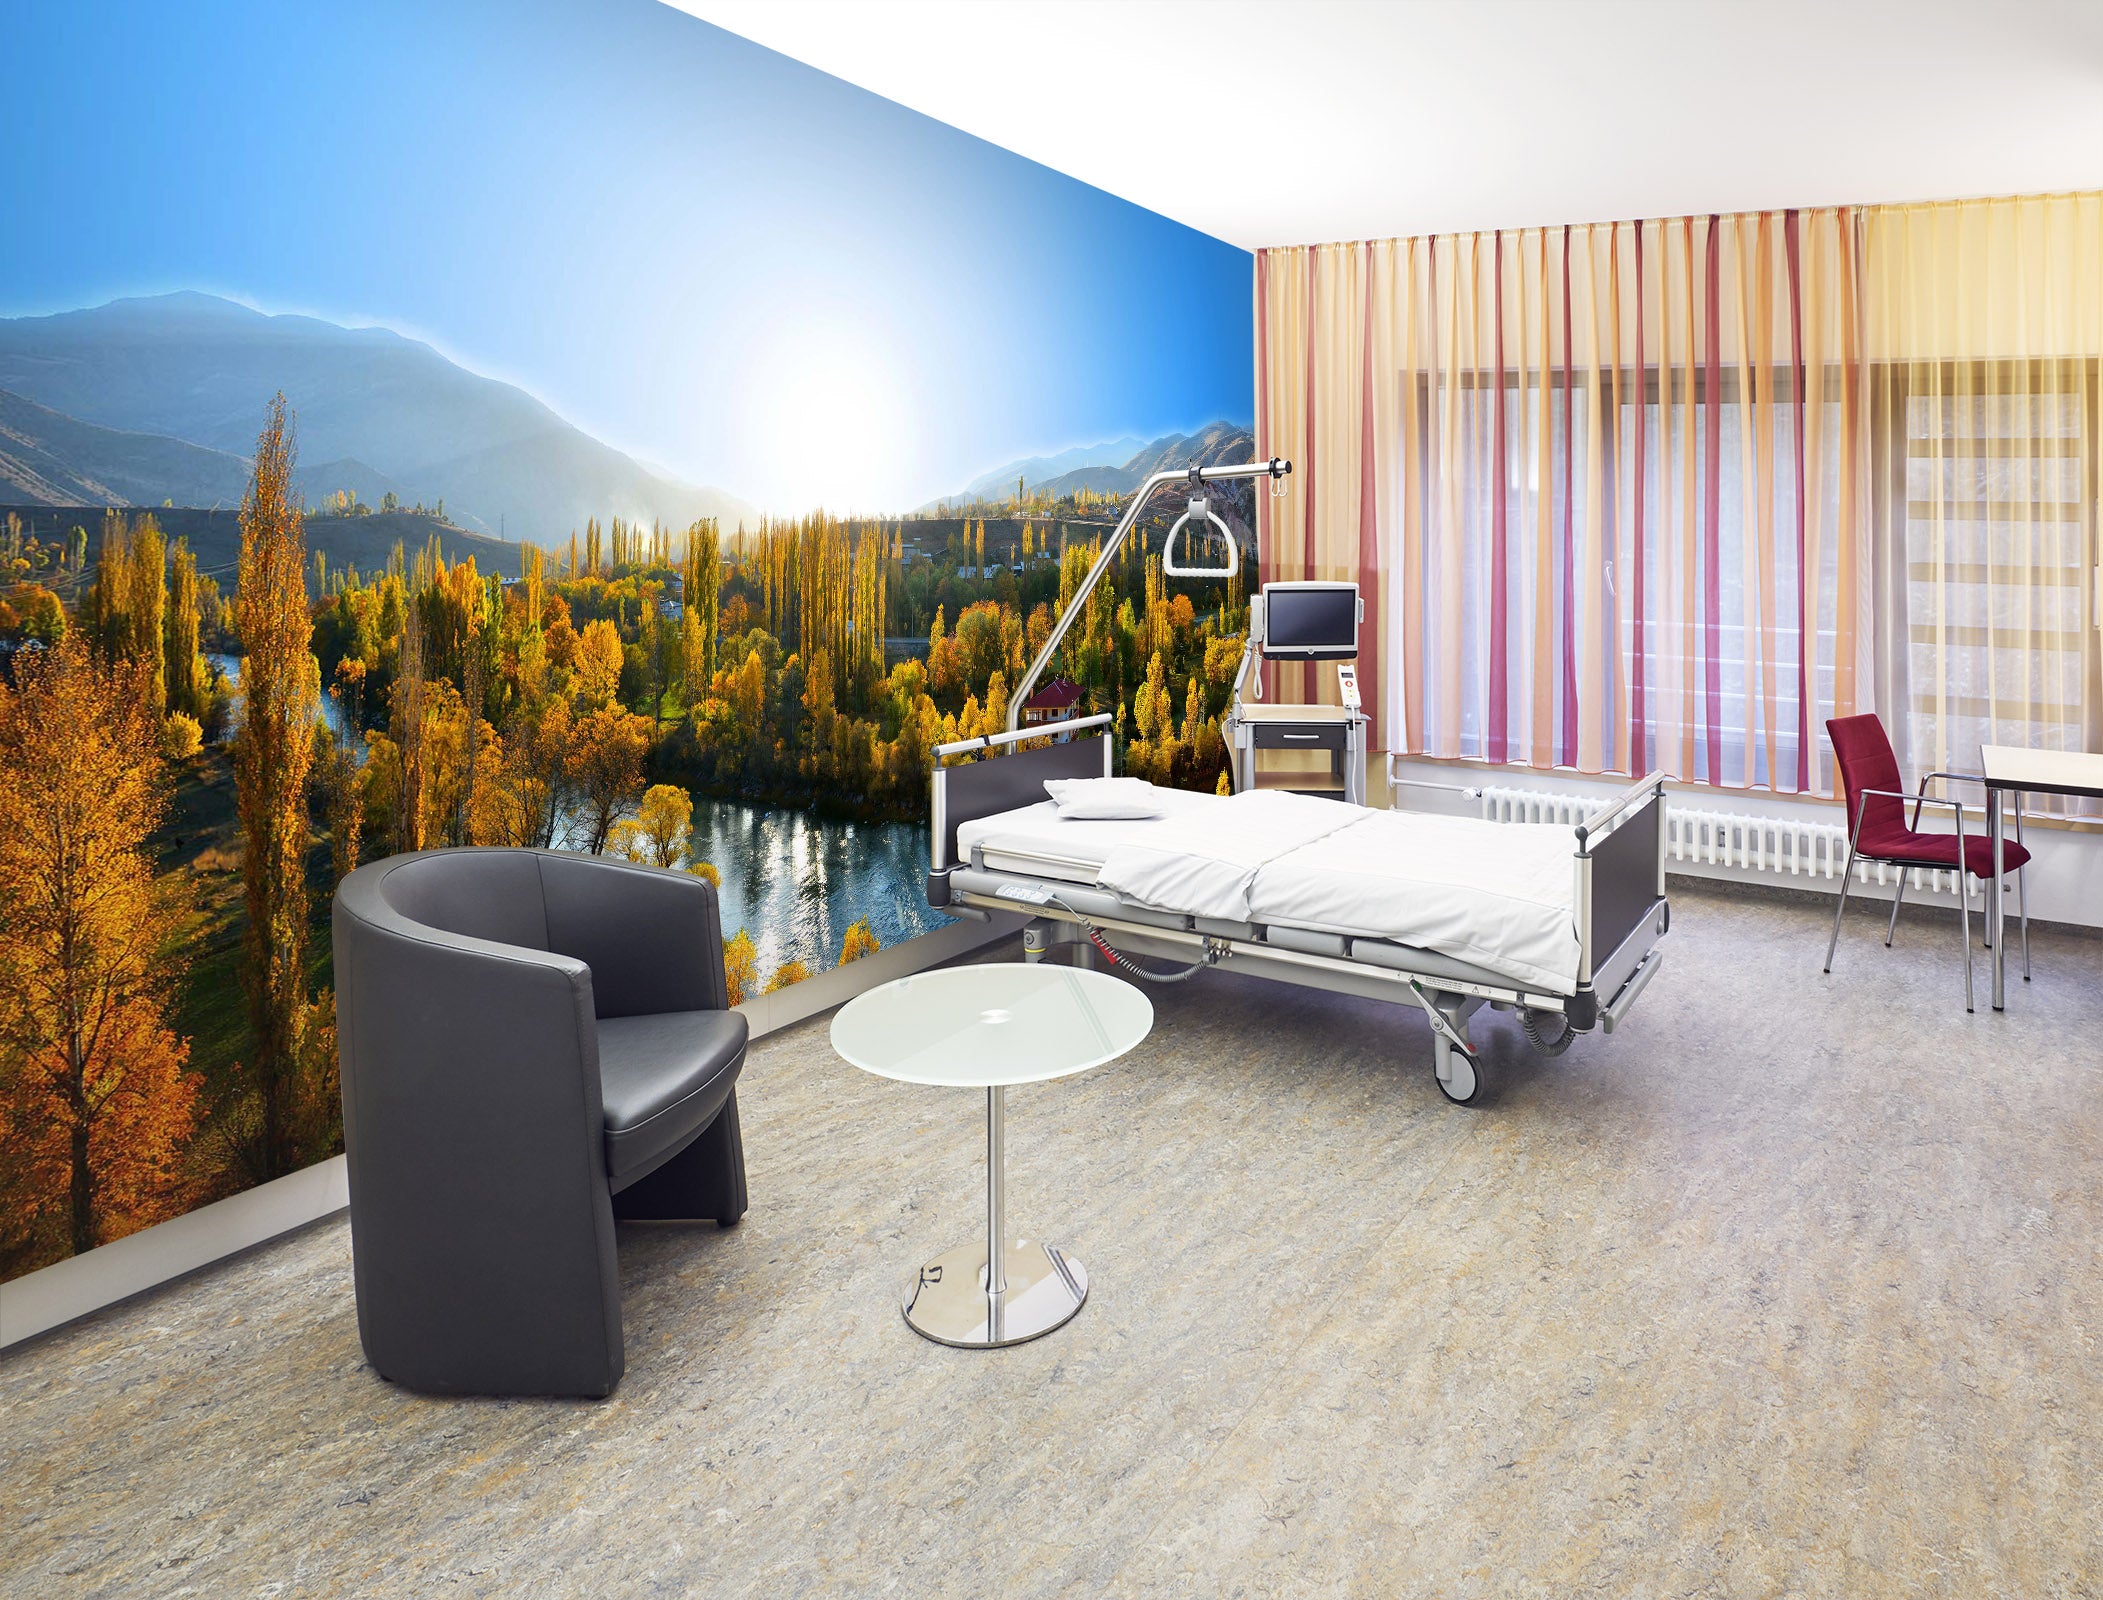 3D Forest Rriver House 219 Wall Murals